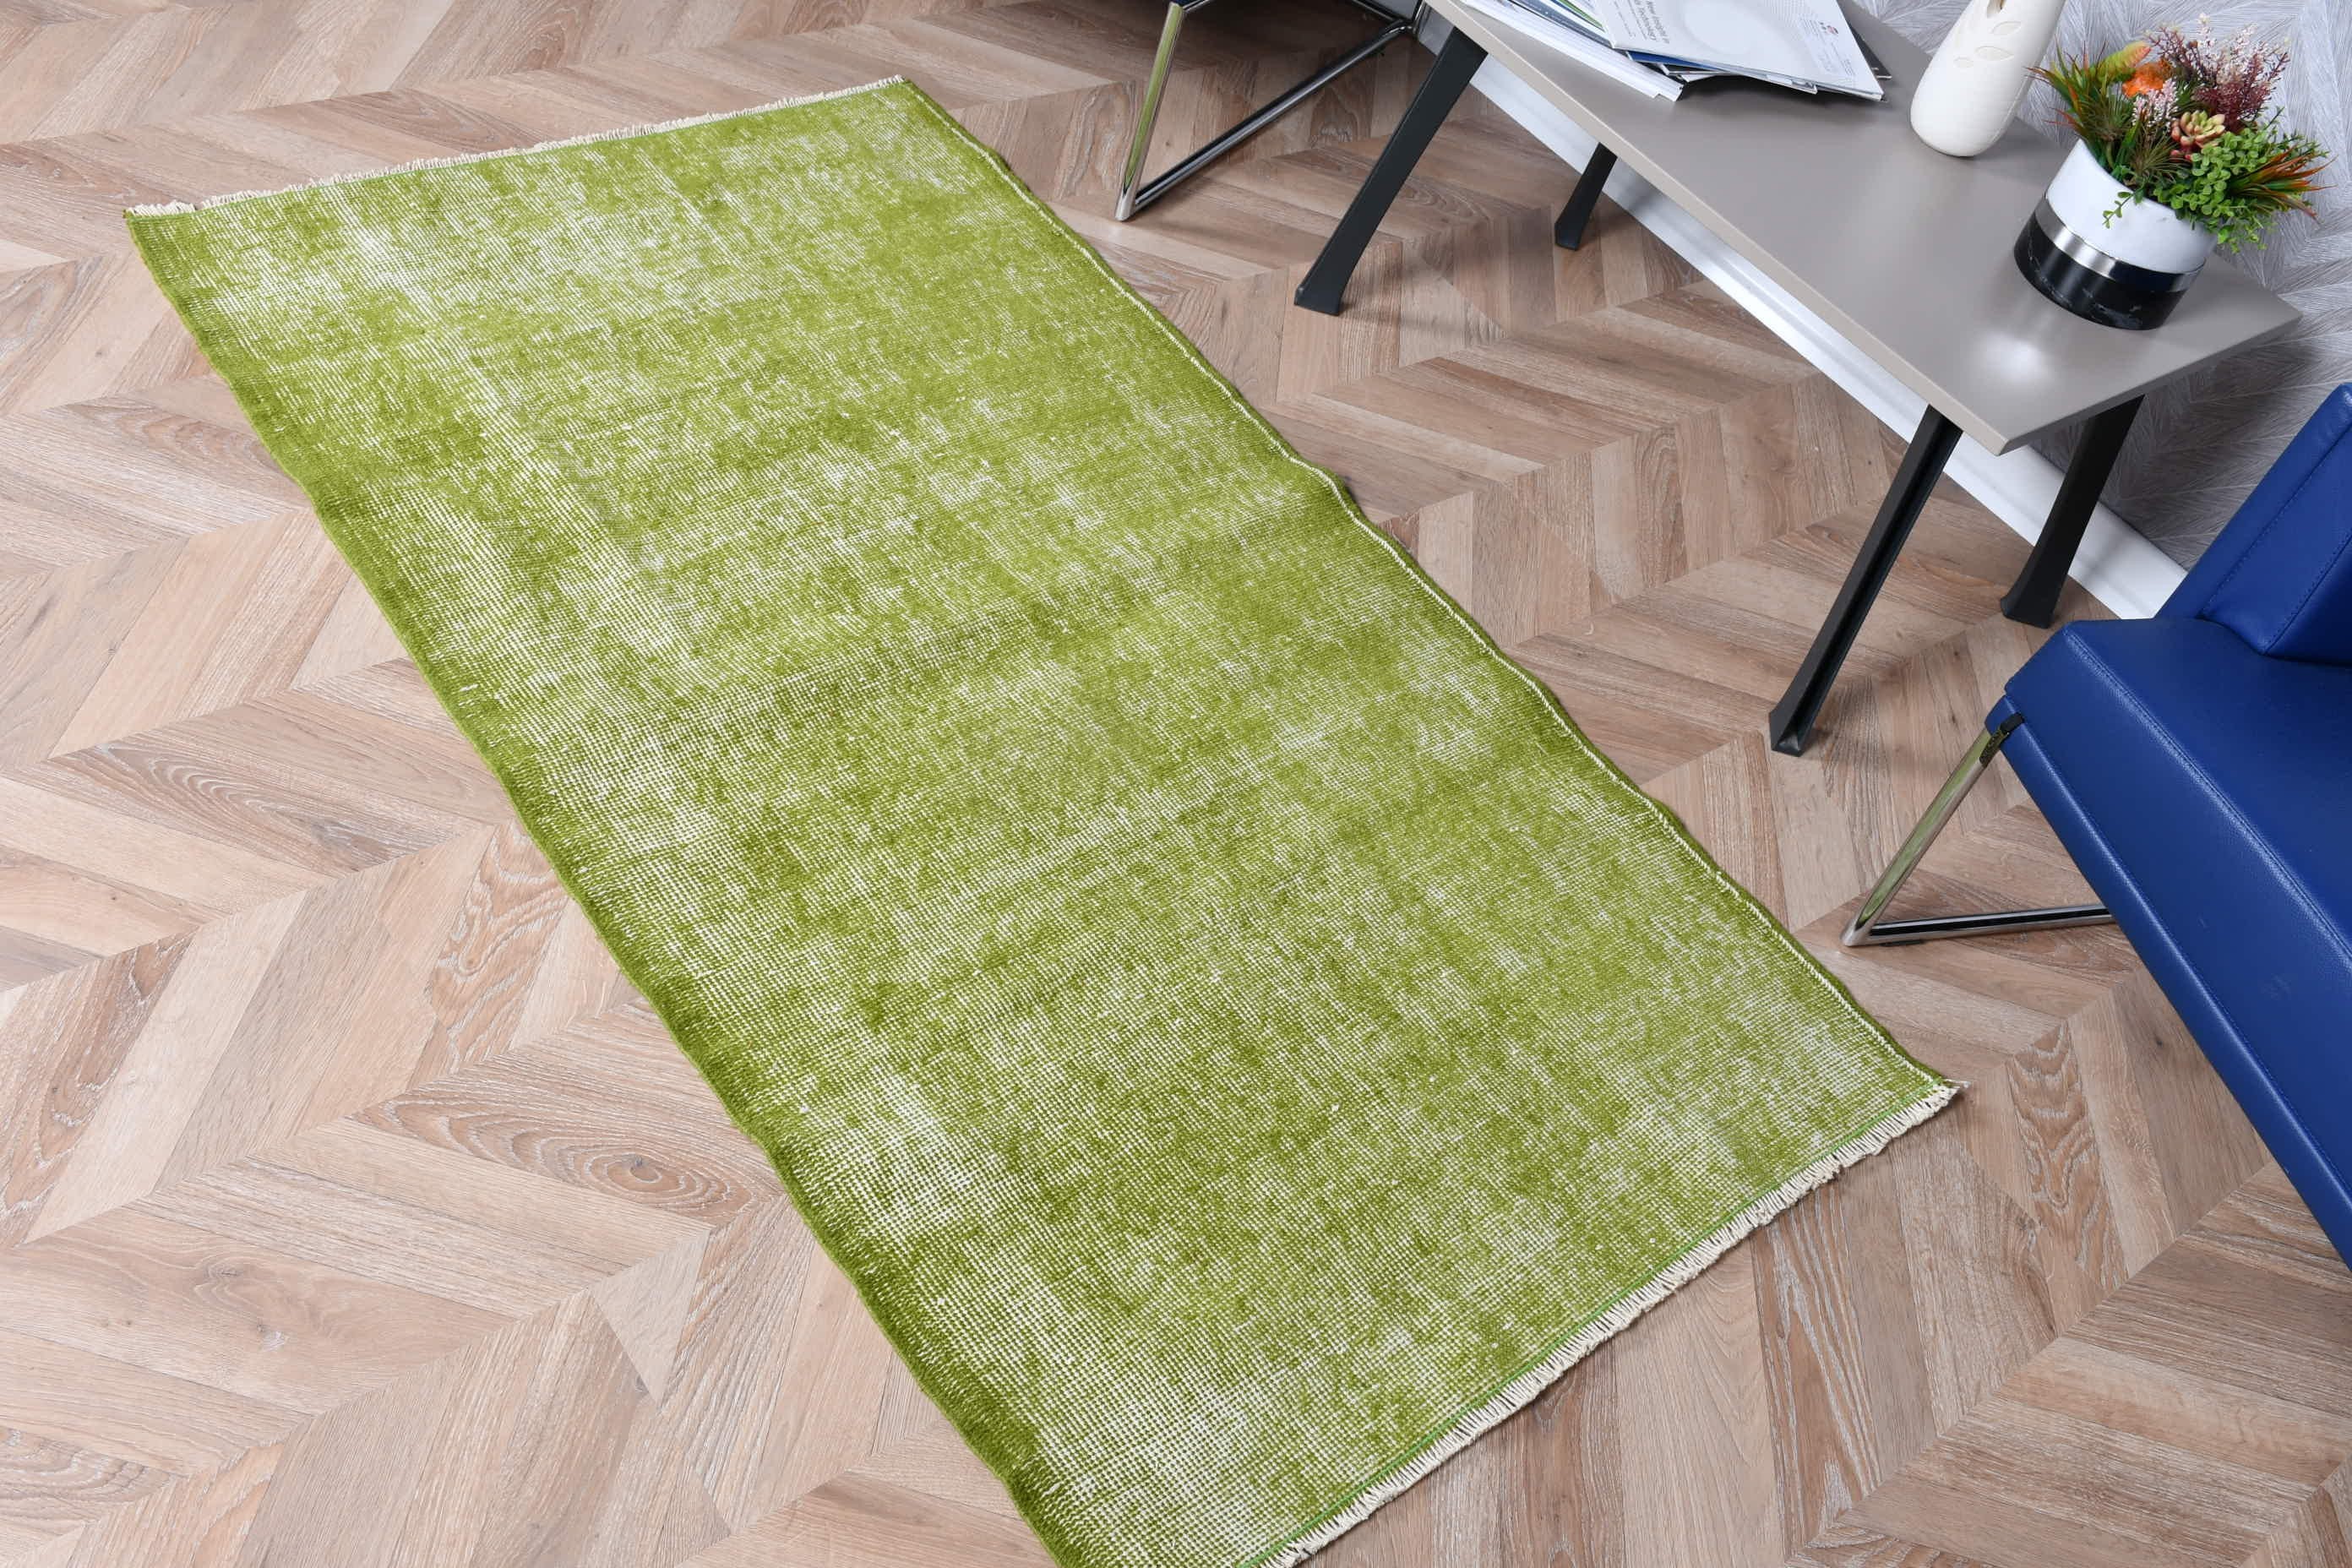 Turkish Rug, Kitchen Rug, Wool Rug, Home Decor Rug, 2.9x5.2 ft Accent Rug, Nursery Rugs, Green Bedroom Rugs, Rugs for Entry, Vintage Rug